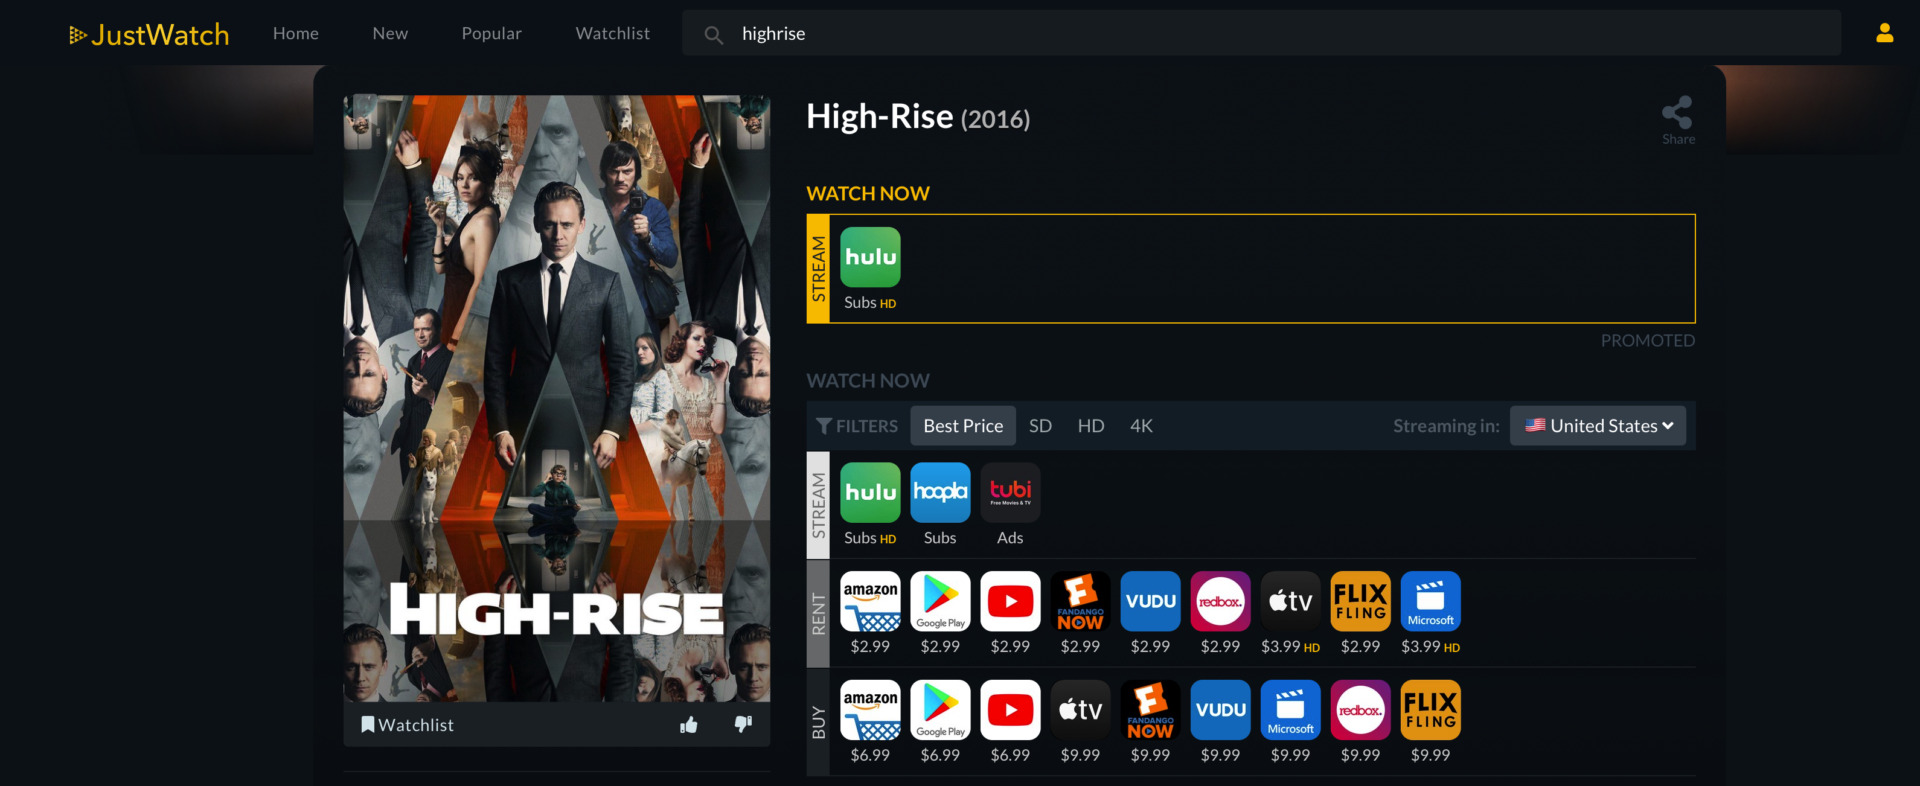 Justwatch High-Rise